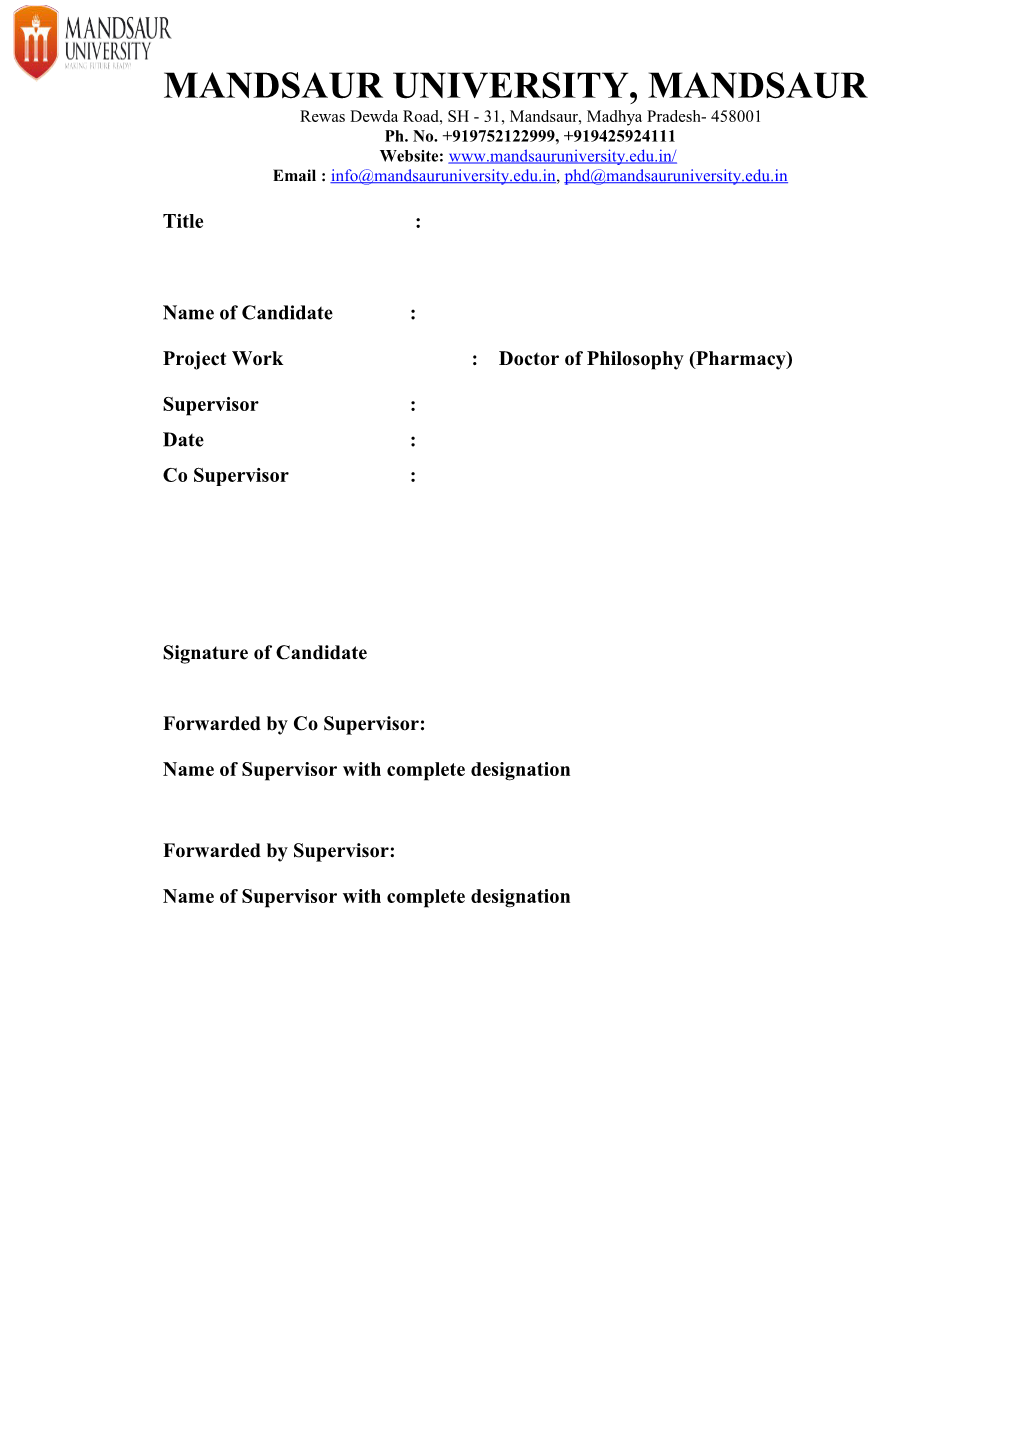 Project Work : Doctor of Philosophy (Pharmacy)